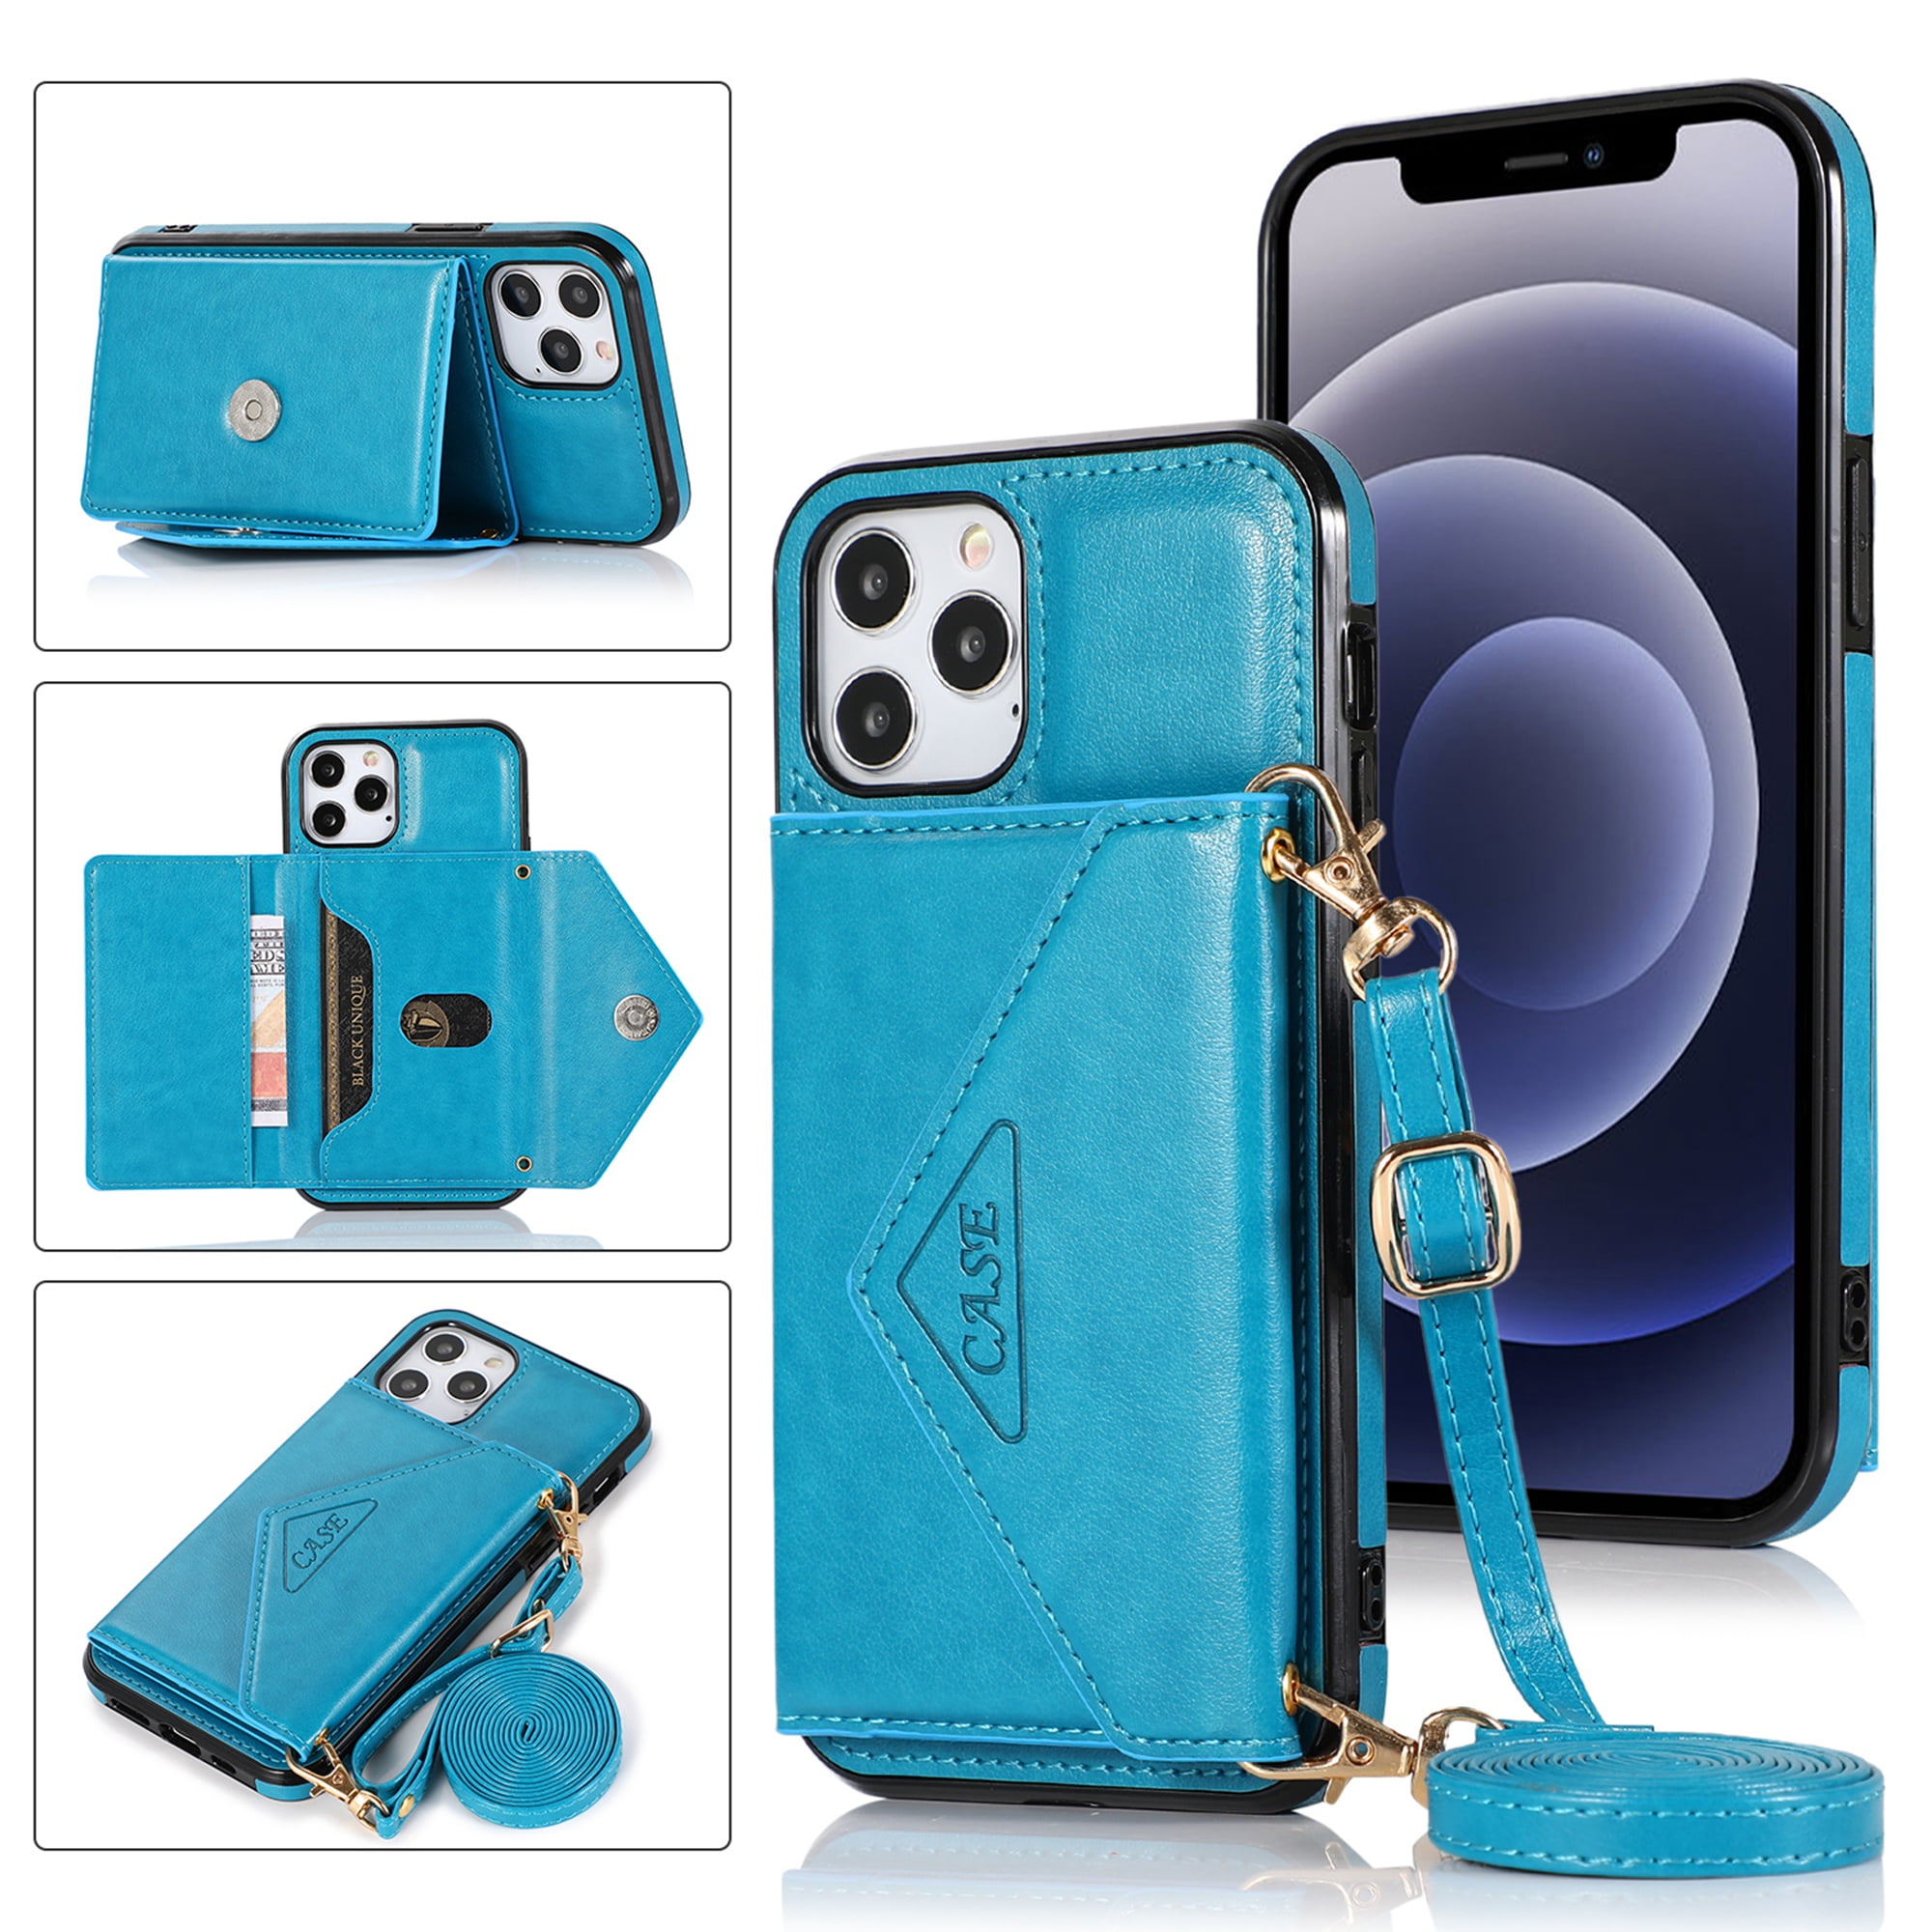 Cover for Leather Kickstand Cell Phone case Luxury Business Card Holders Flip Cover iPhone X Flip Case 